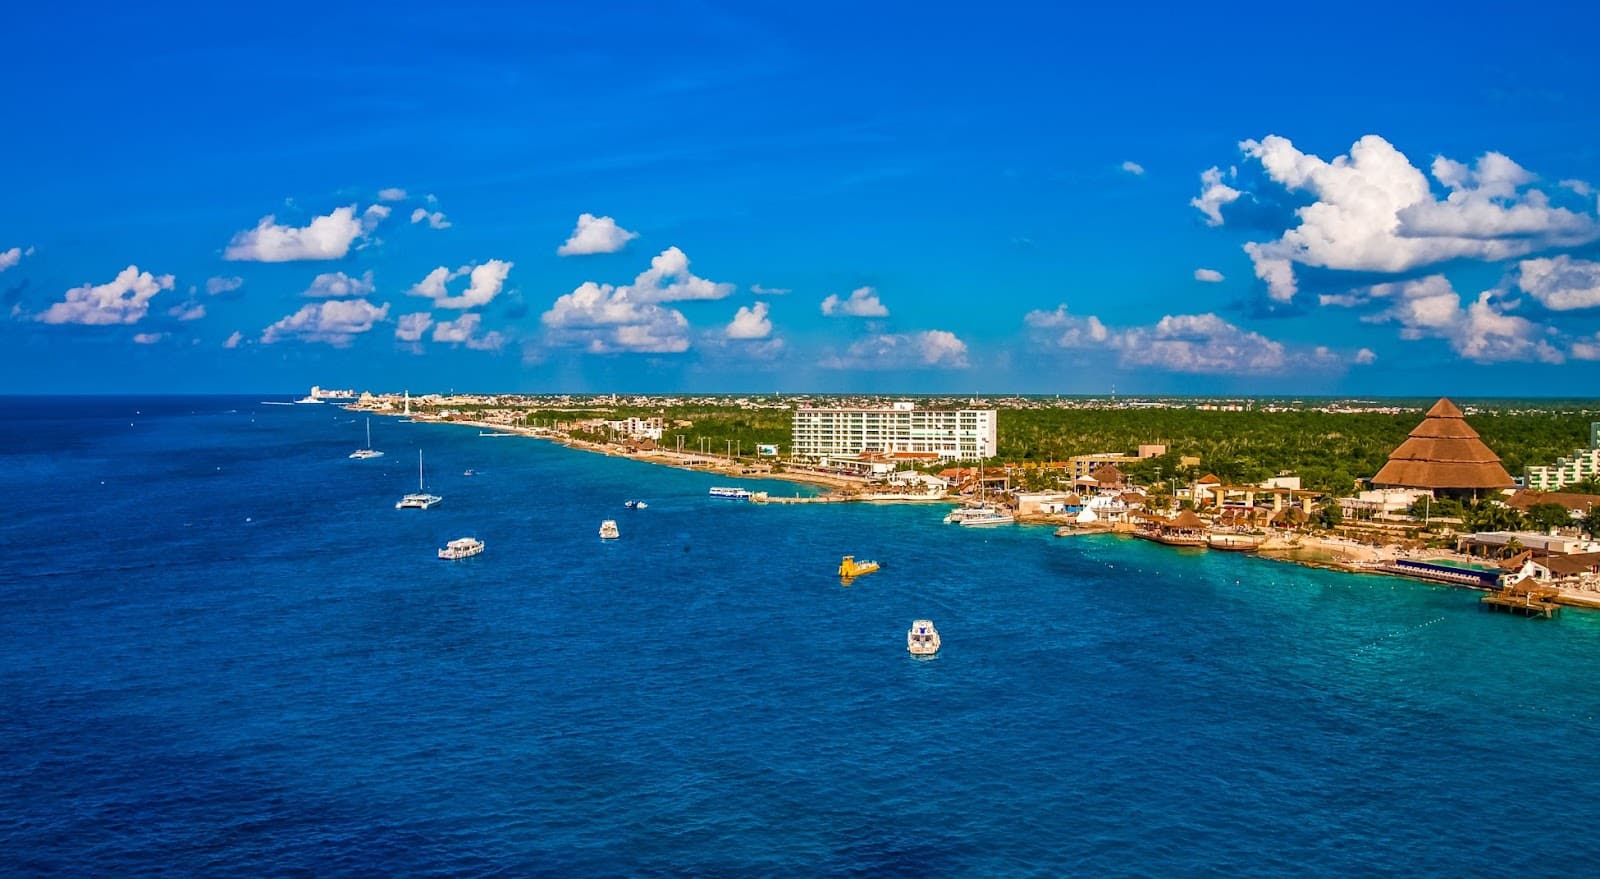 The coast of Cozumel, Mexico from the sea